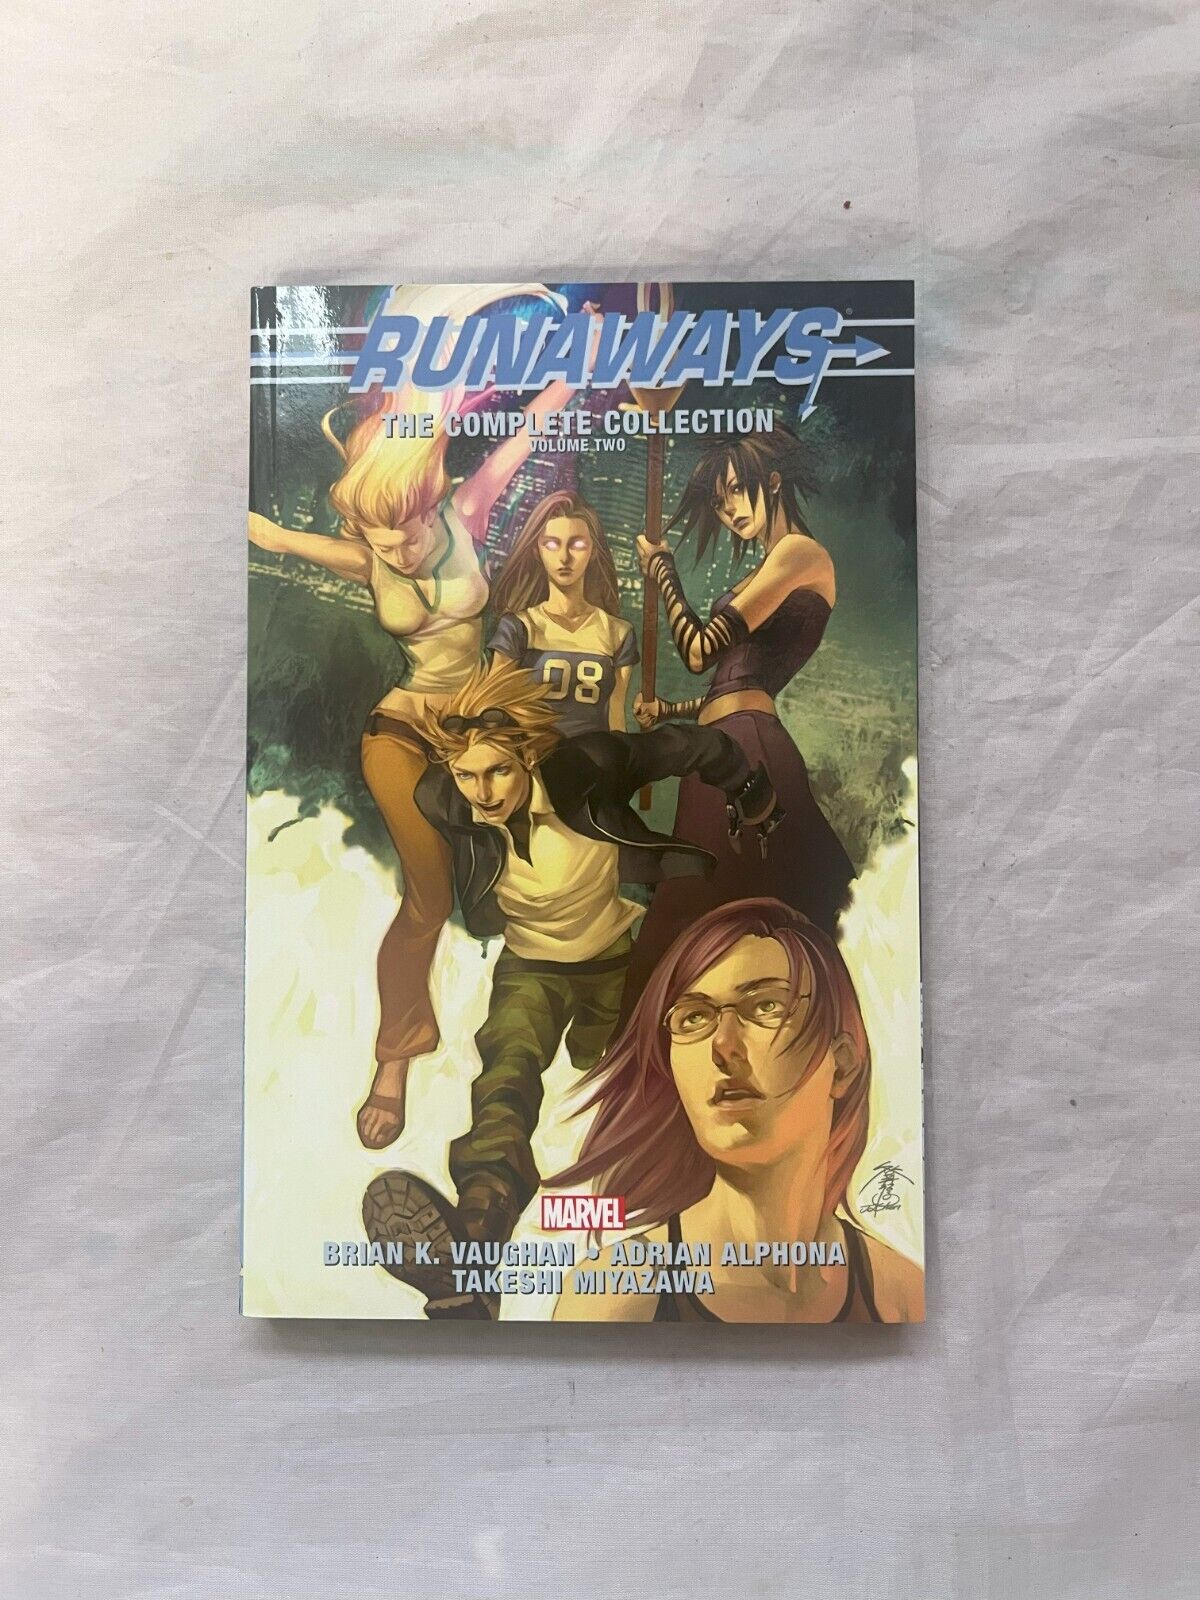 Runaways: The Complete Collection #2 (Marvel, 2018) Brian K. Vaughan